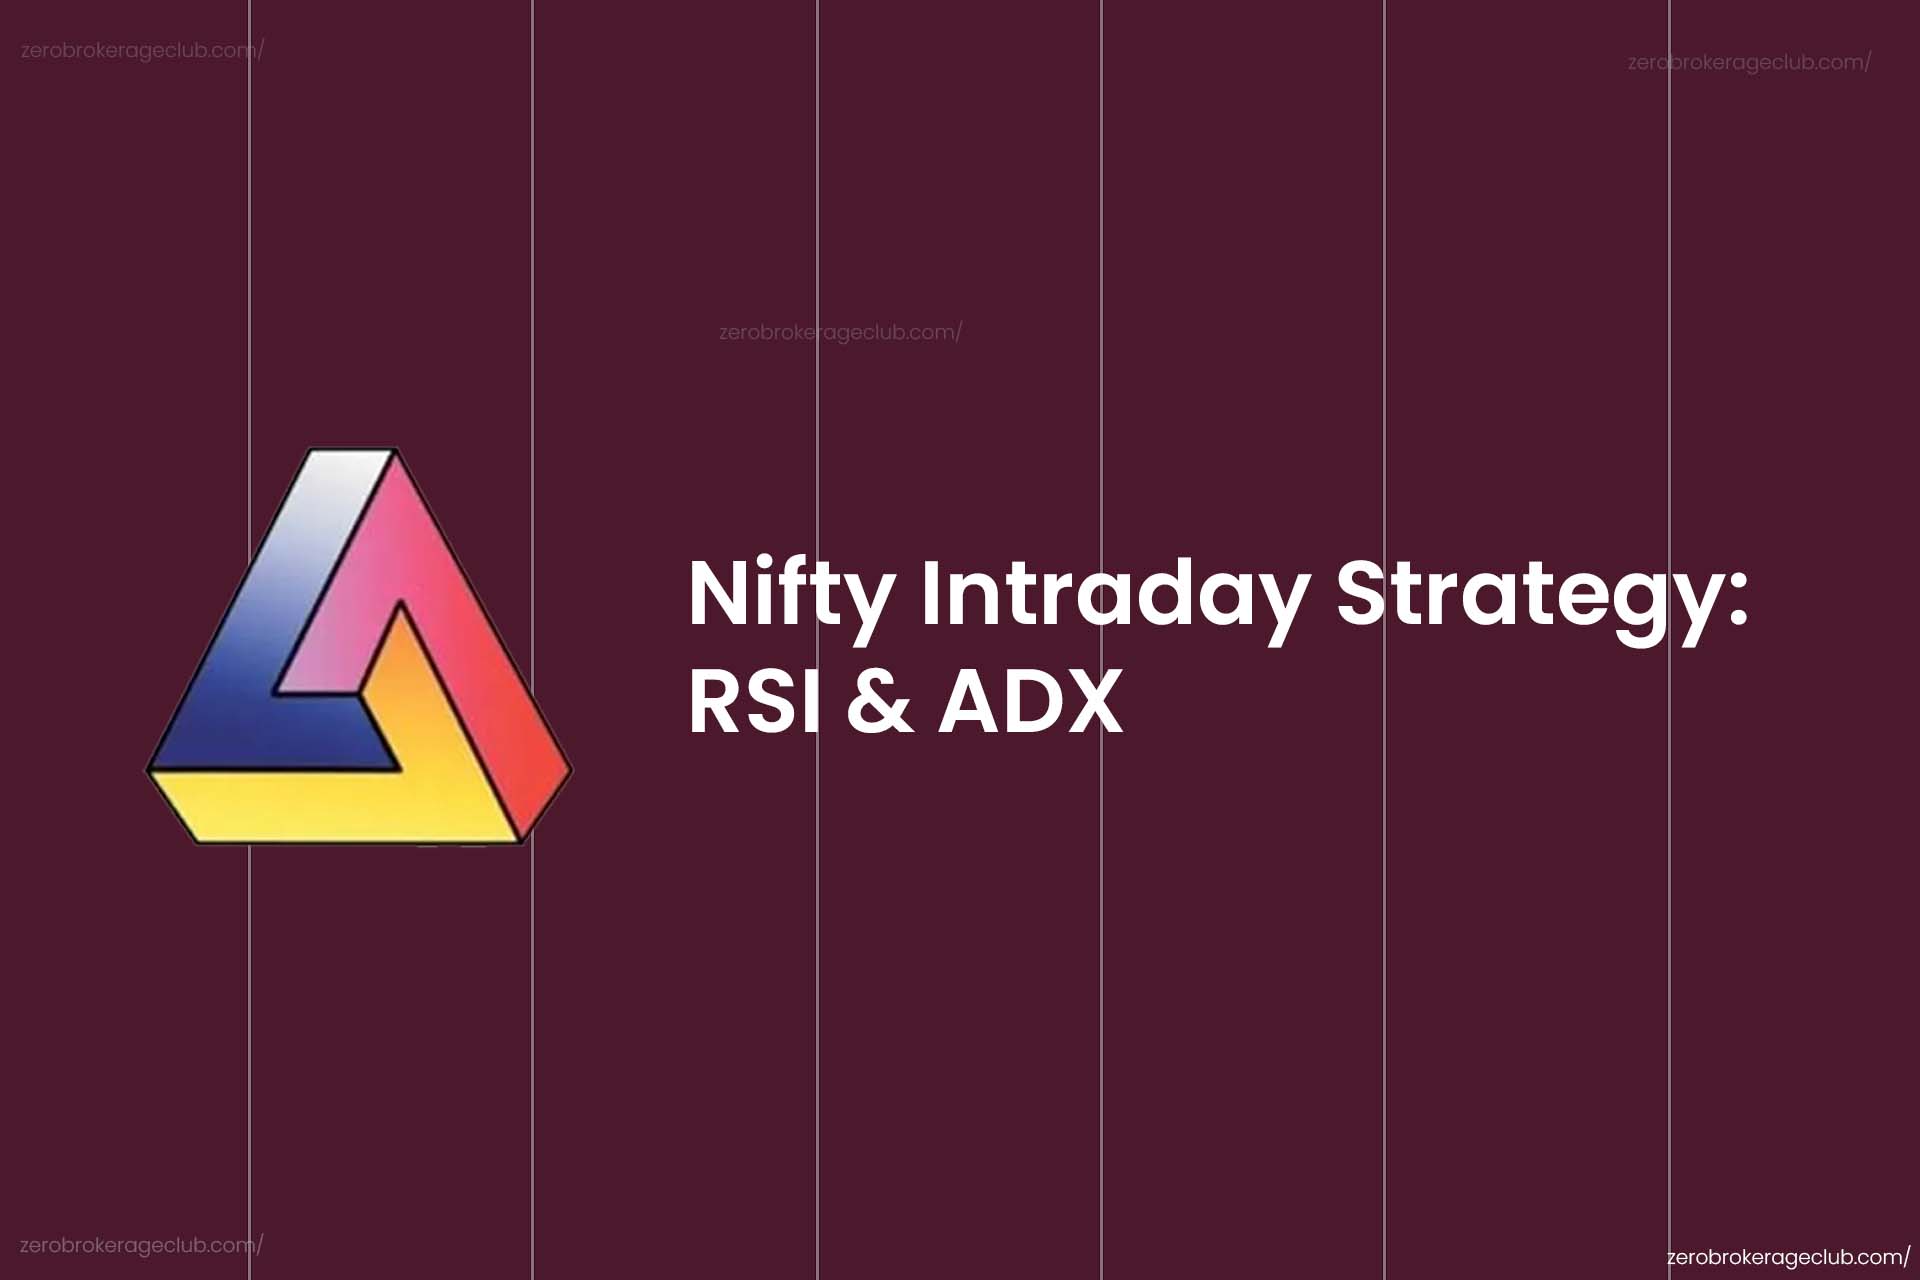 Nifty Intraday Strategy: RSI & ADX